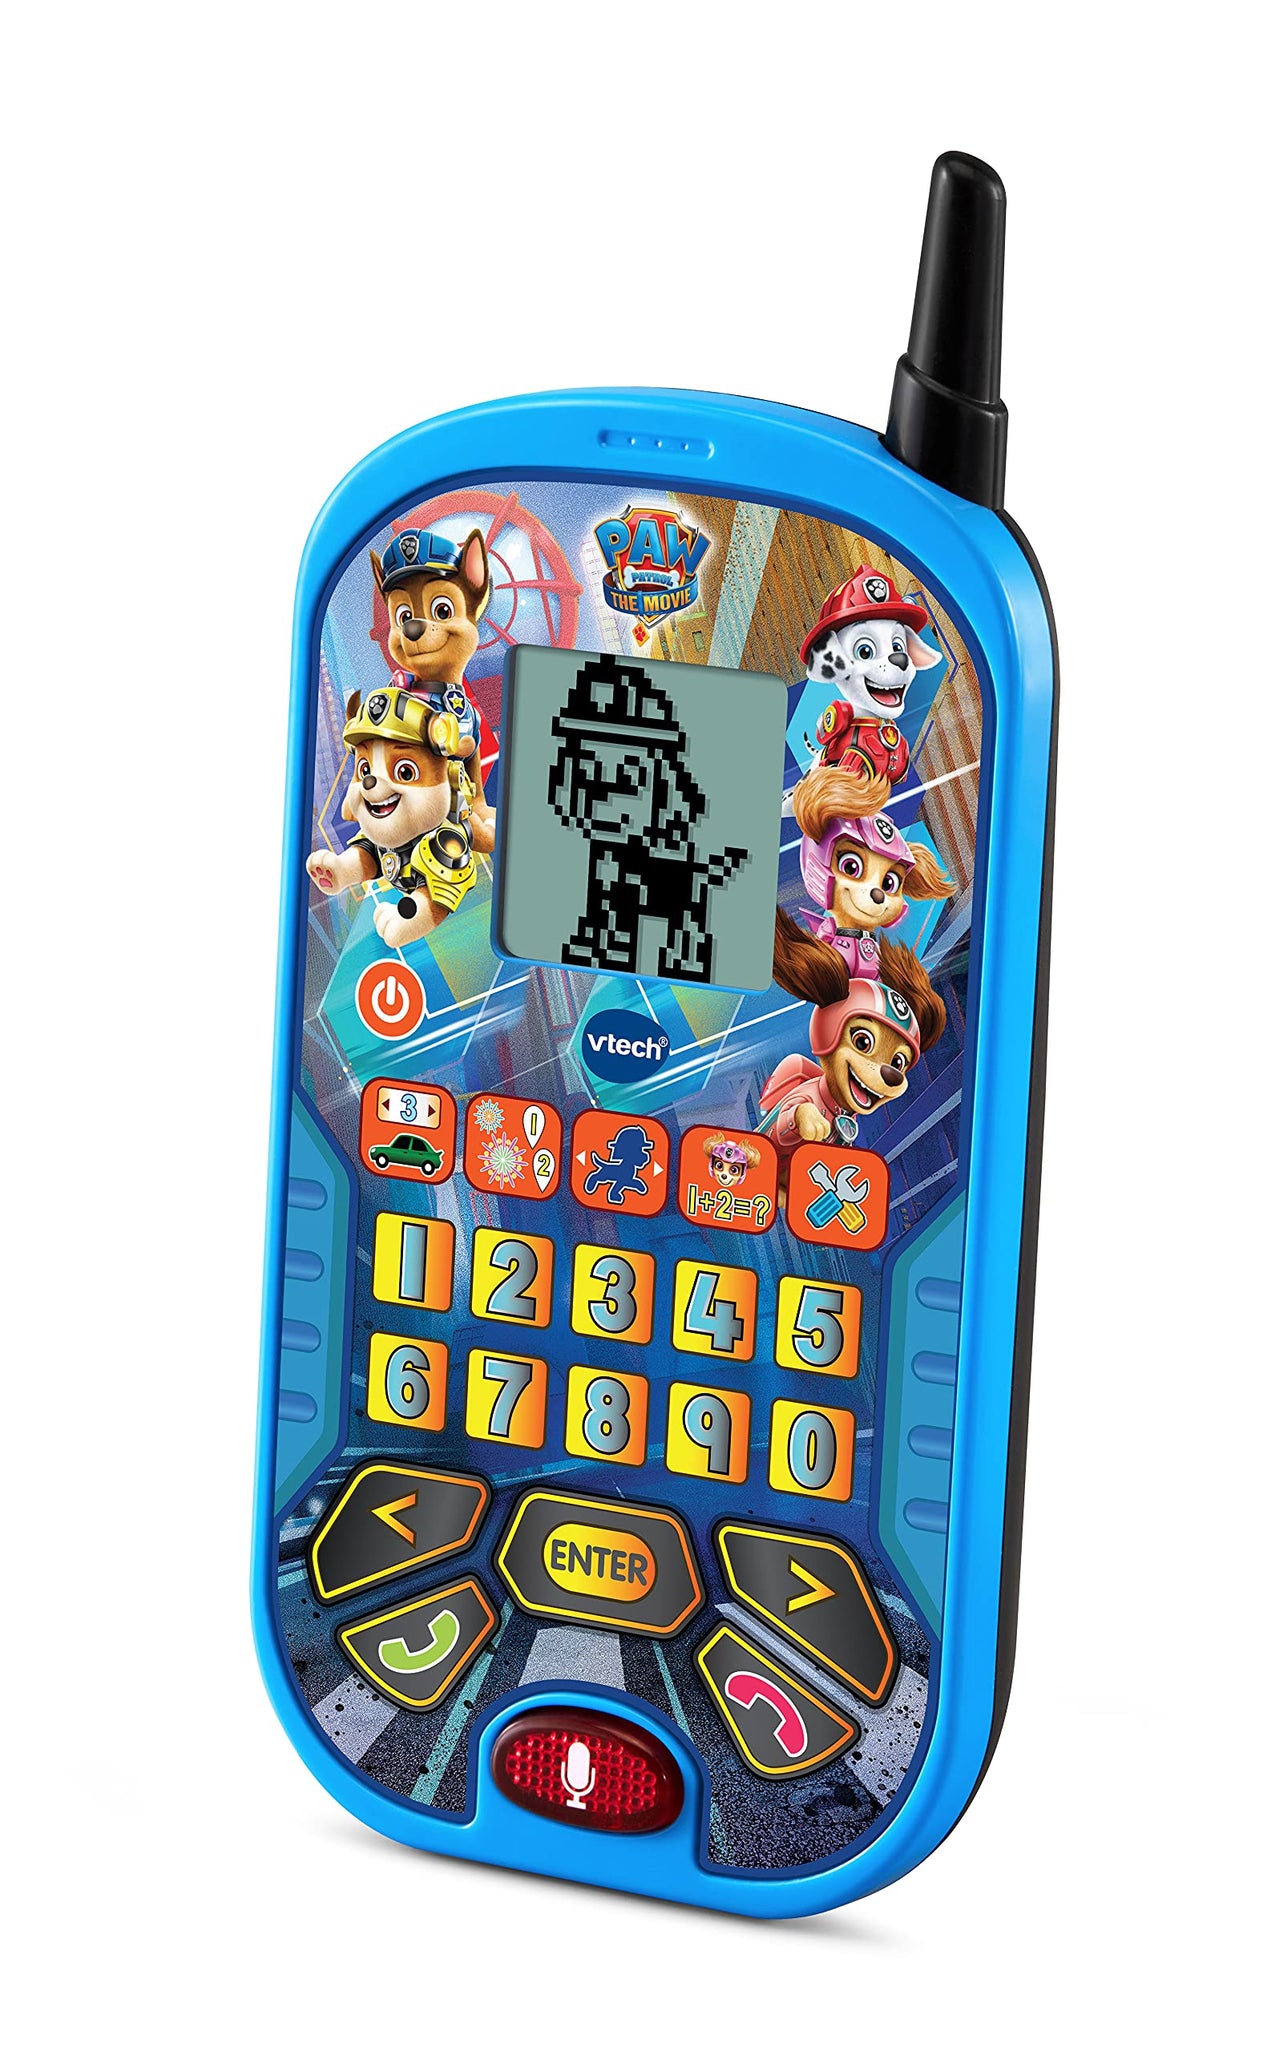 VTech PAW Patrol - The Movie: Learning Phone , Blue